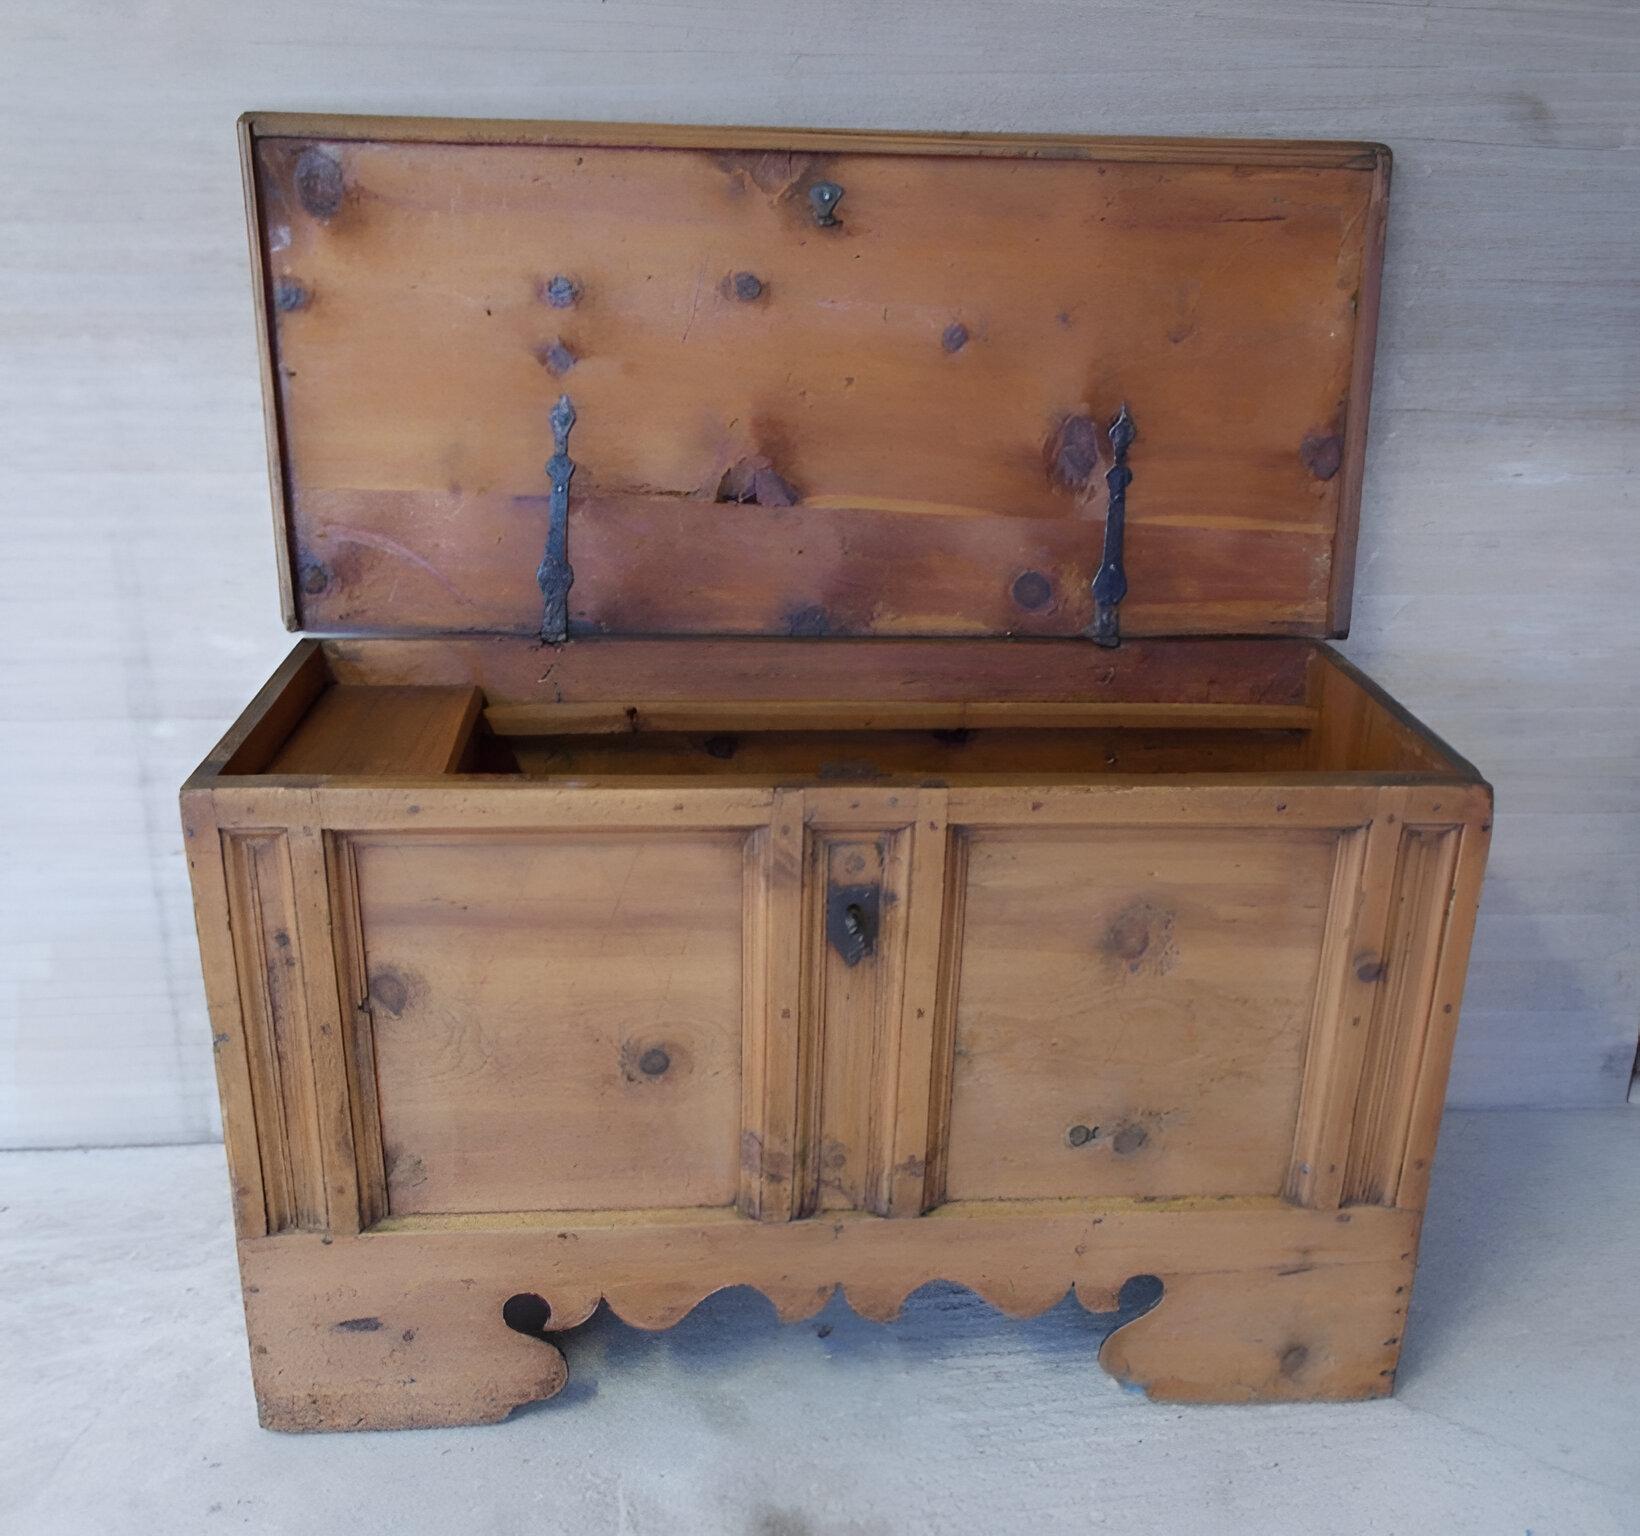 Dowry chest made entirely of stone pine, complete with all original hardware.
Drawer inside.
Minimally restored with wax finish.

Reference measurements are at the frame.
More pictures and information at customer's request.
